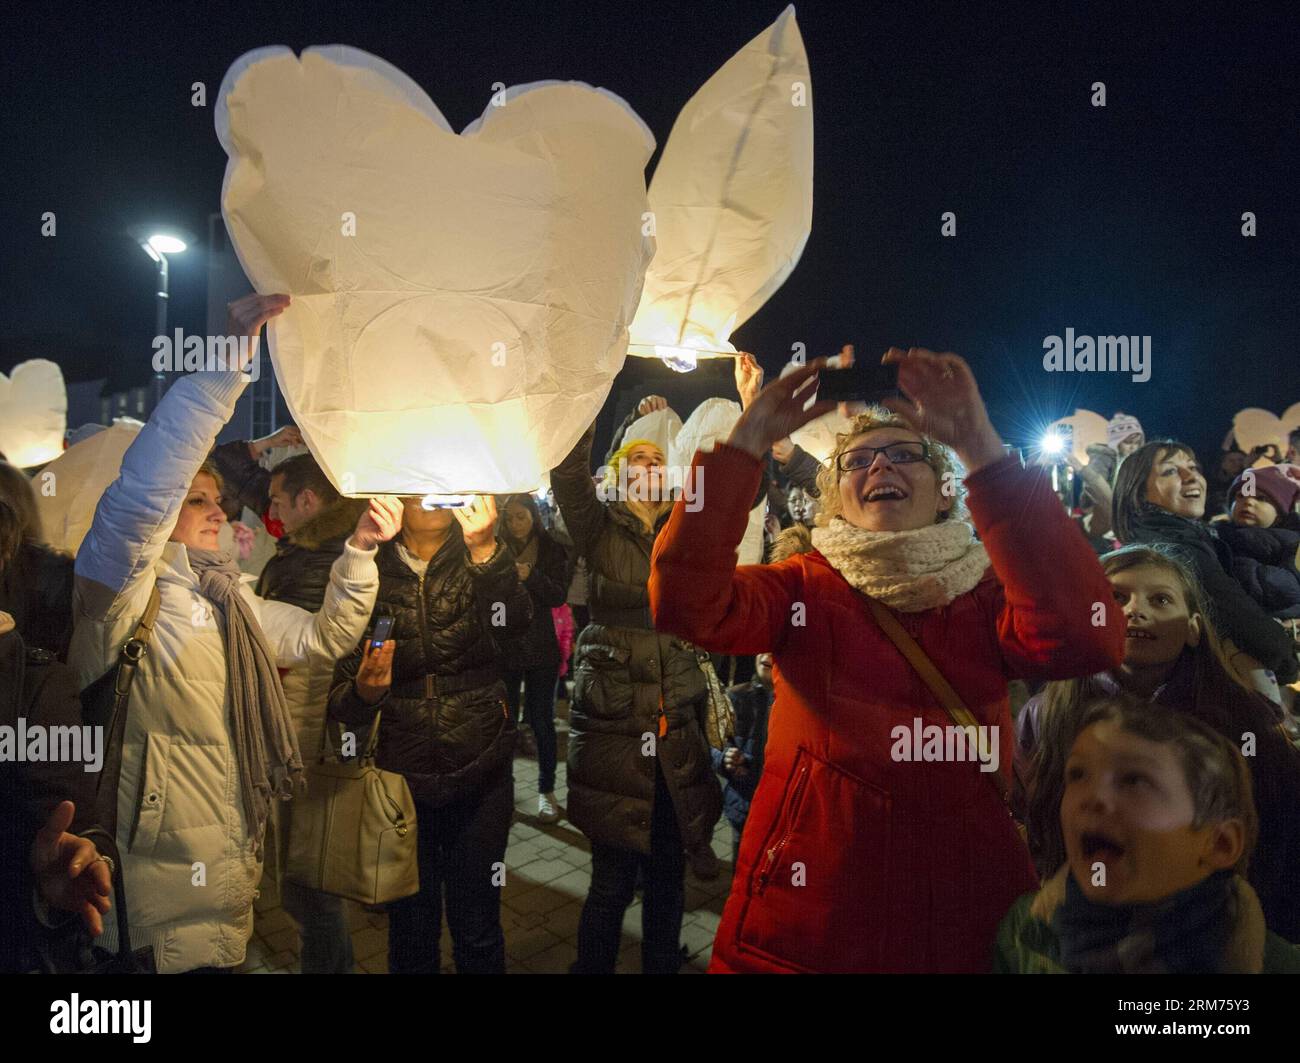 People fly lanterns into the night sky during the Lampionovo Lantern Festival in Zapresic, Croatia, Feb. 14, 2014. People released lanterns carrying their hopes and best wishes during the festival on Friday, and signed a huge Valentine s Day card to their twin town of Kastela. (Xinhua/Miso Lisanin) (zhf) CROATIA-ZAPRESIC-LANTERN FESTIVAL PUBLICATIONxNOTxINxCHN   Celebrities Fly Lanterns into The Night Sky during The  Lantern Festival in  Croatia Feb 14 2014 Celebrities released Lanterns carrying their Hopes and Best wishes during The Festival ON Friday and signed a Huge Valentine S Day Card to Stock Photo